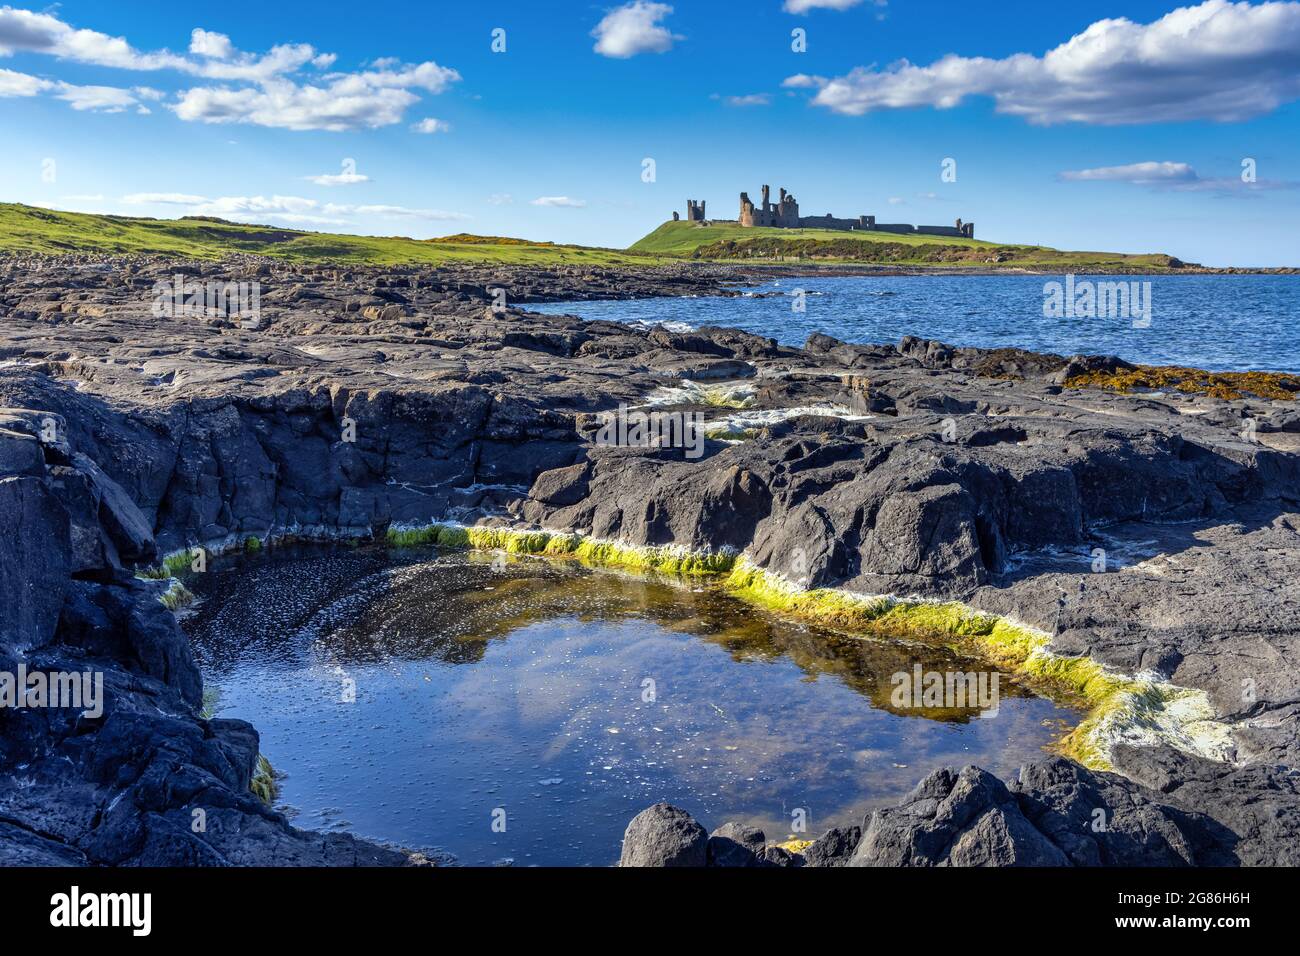 The ruins of Dunstanburgh Castle on the coast of Northumberland, England UK Stock Photo